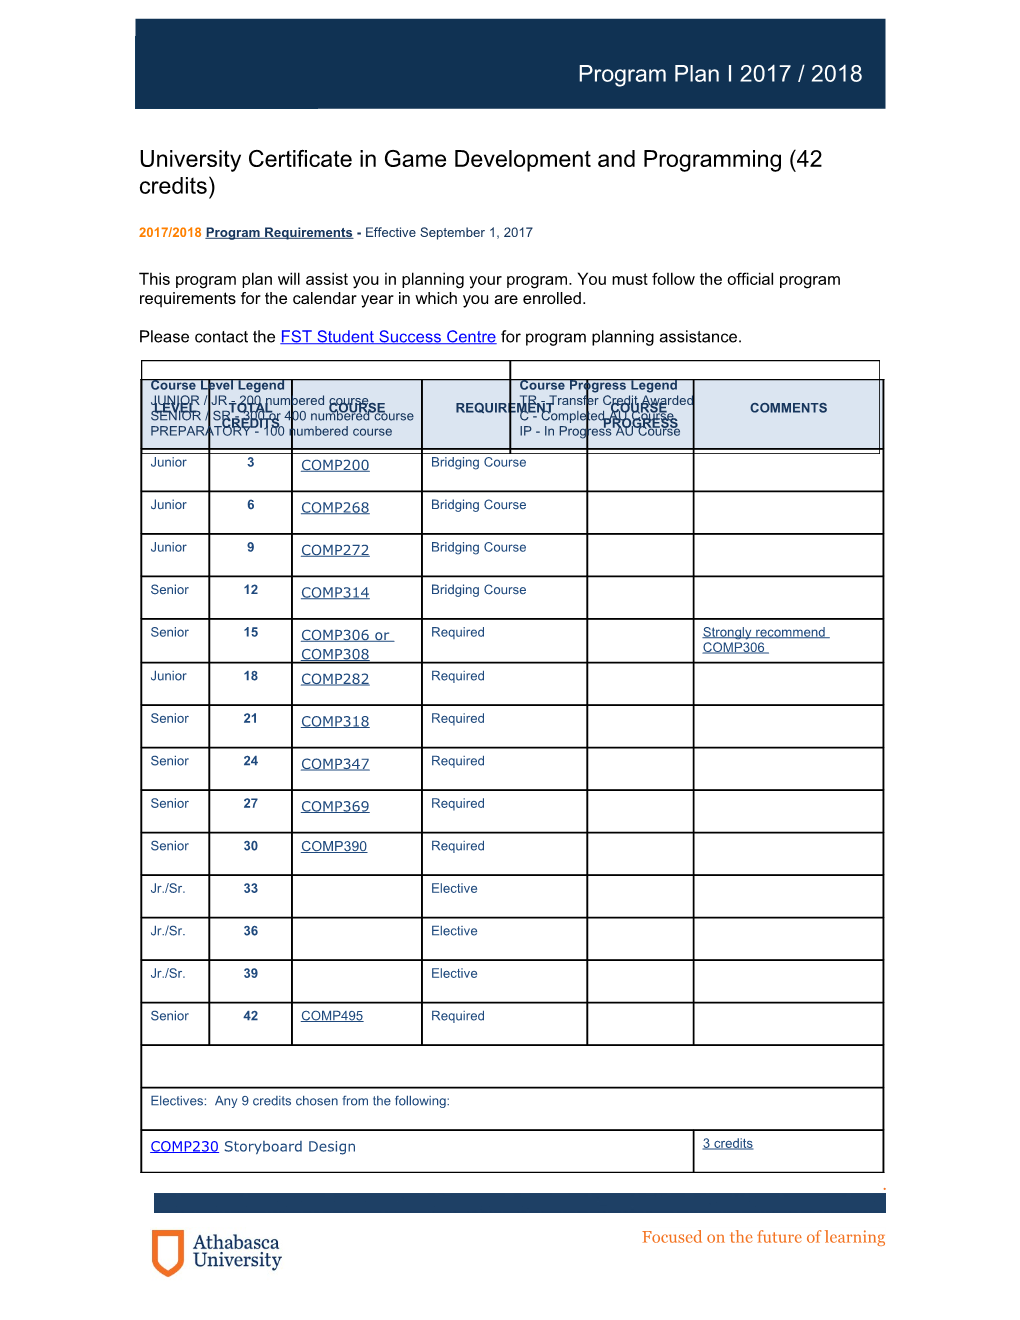 University Certificate in Game Development and Programming (42 Credits)